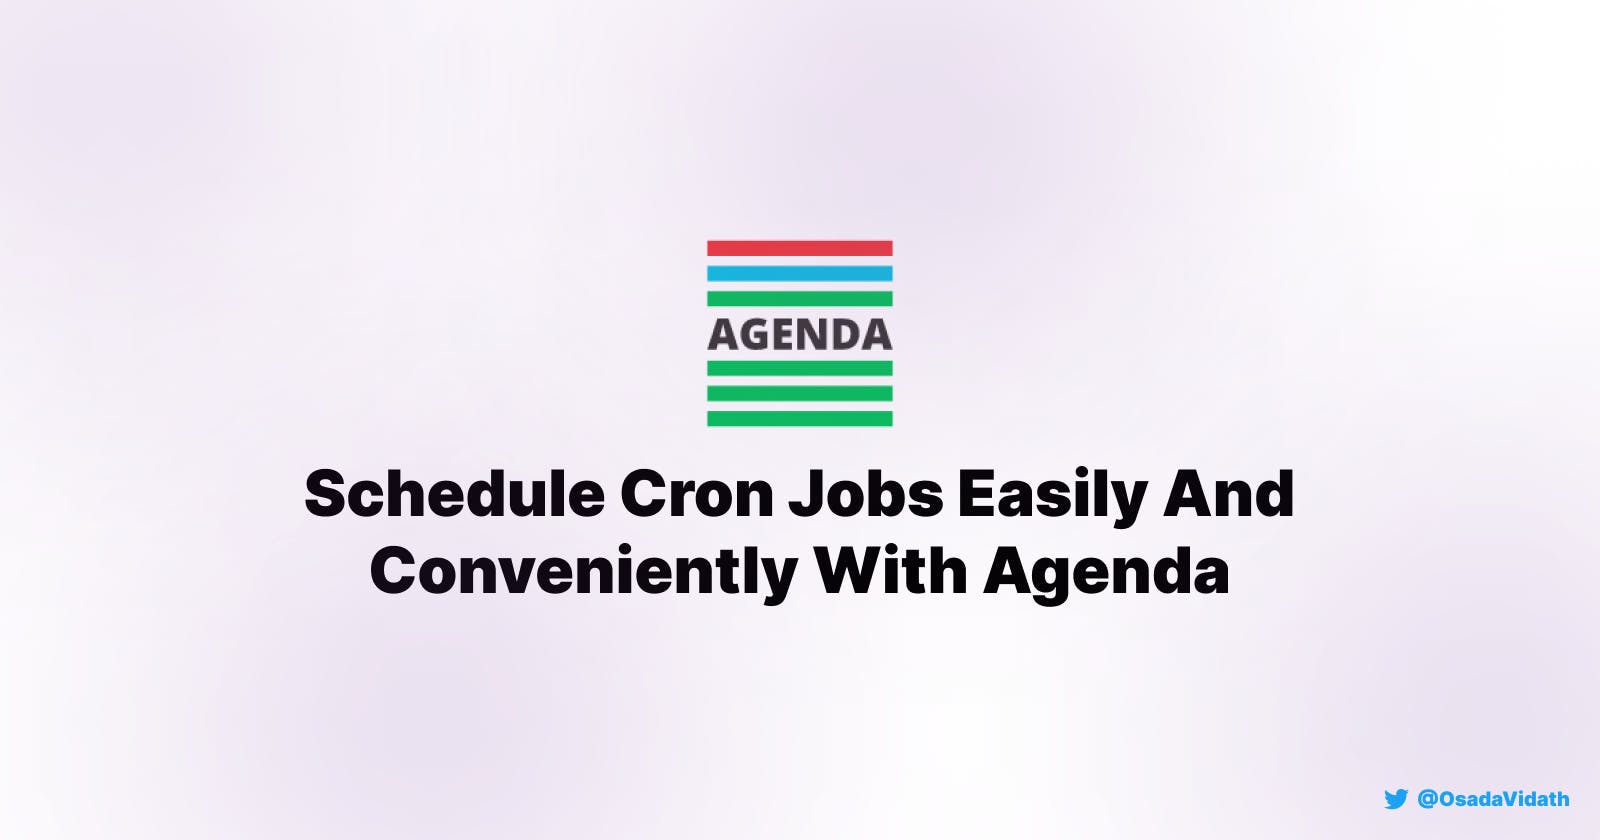 Schedule Cron Jobs Easily And Conveniently With Agenda